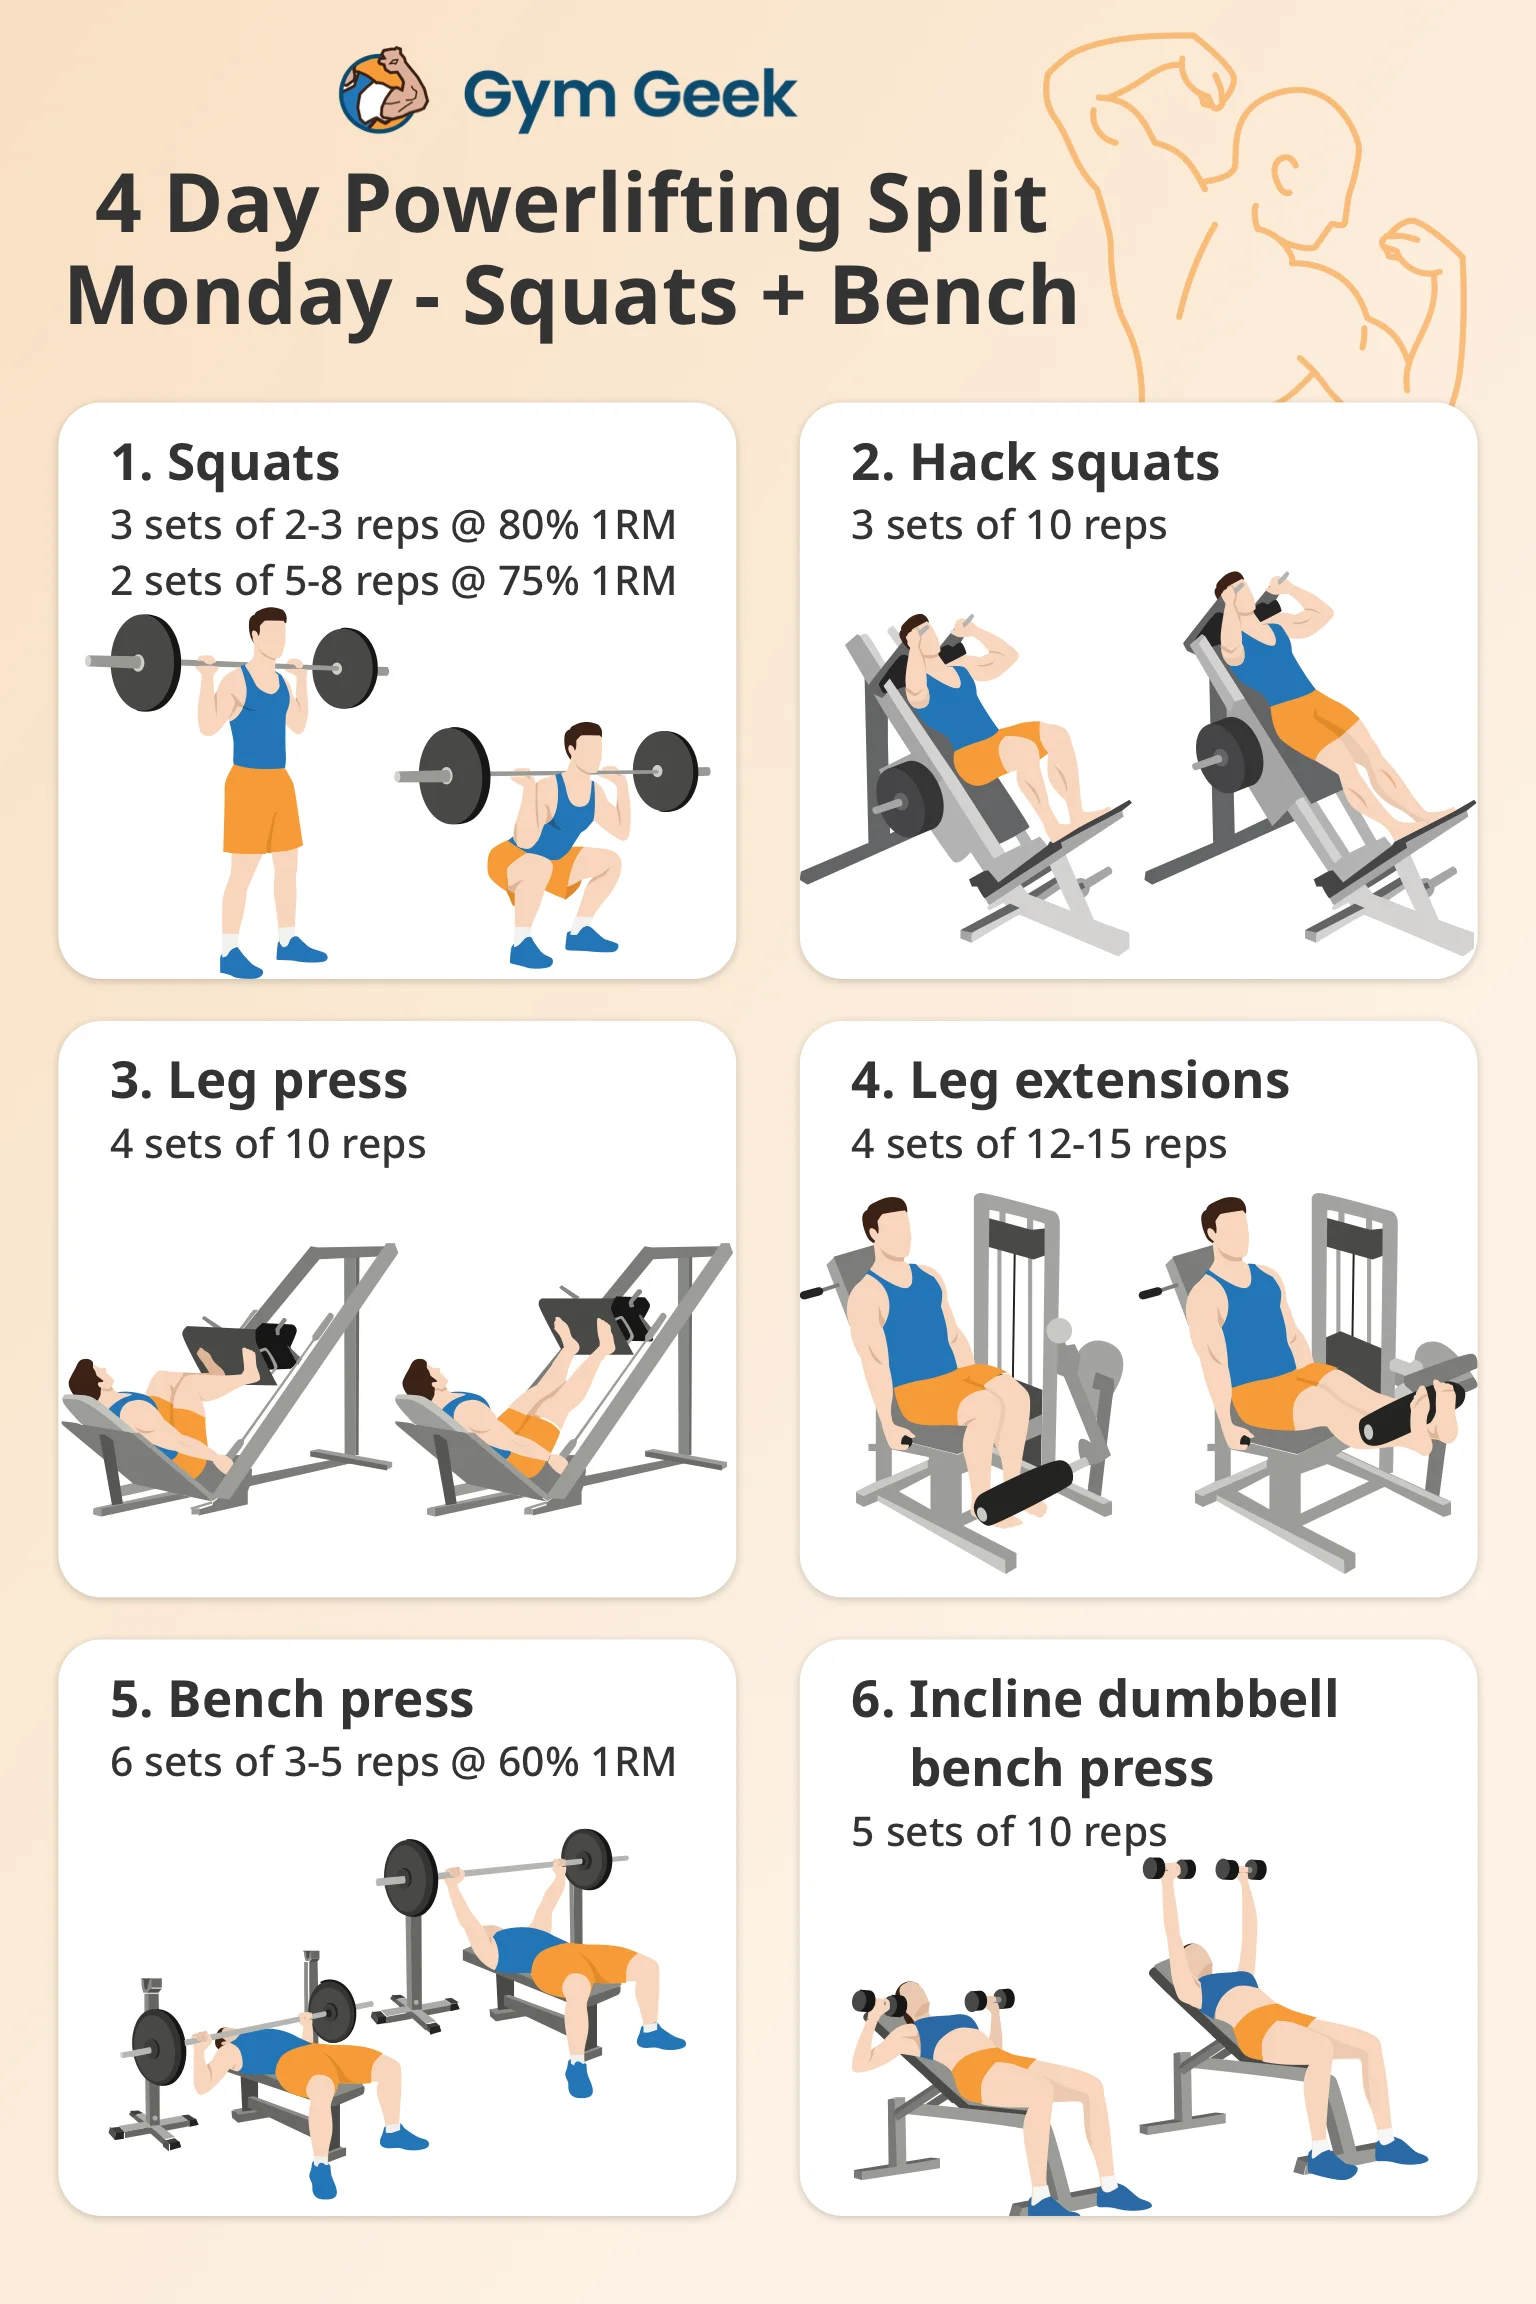 infographic - 4 day powerlifting program - Monday (Squats and bench day)